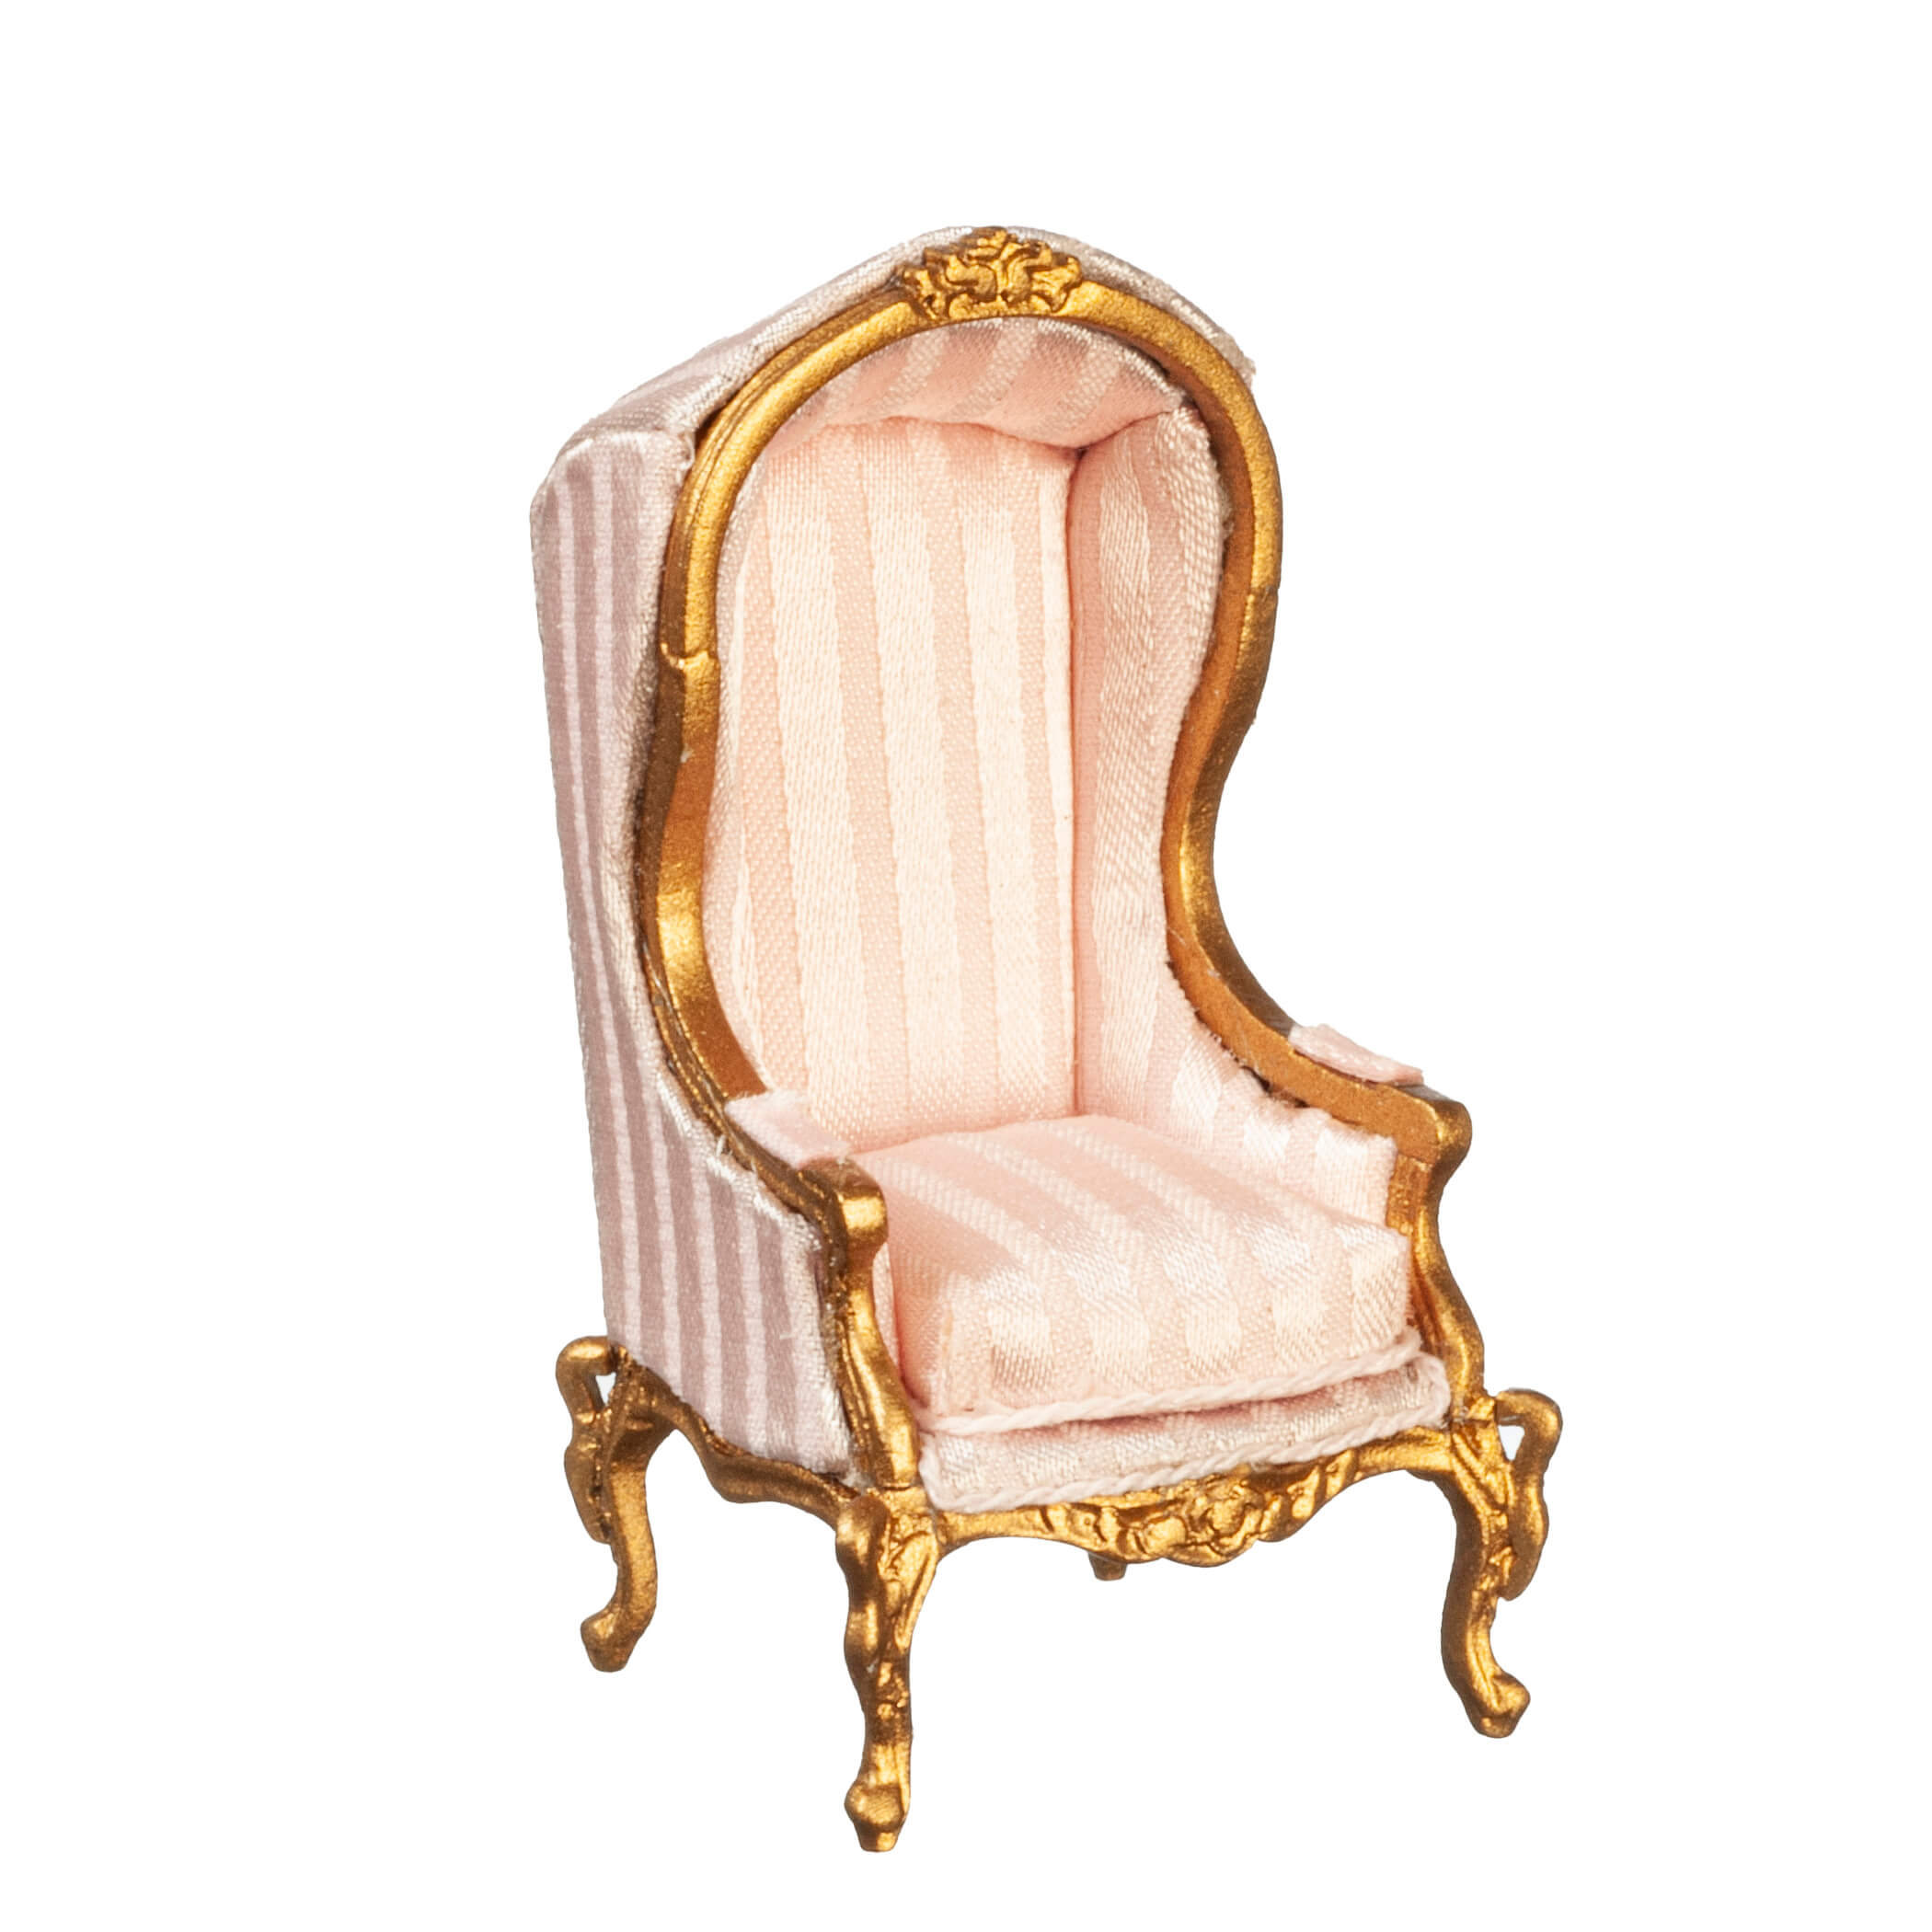 1/2in Scale Hooded Armchair Gold B